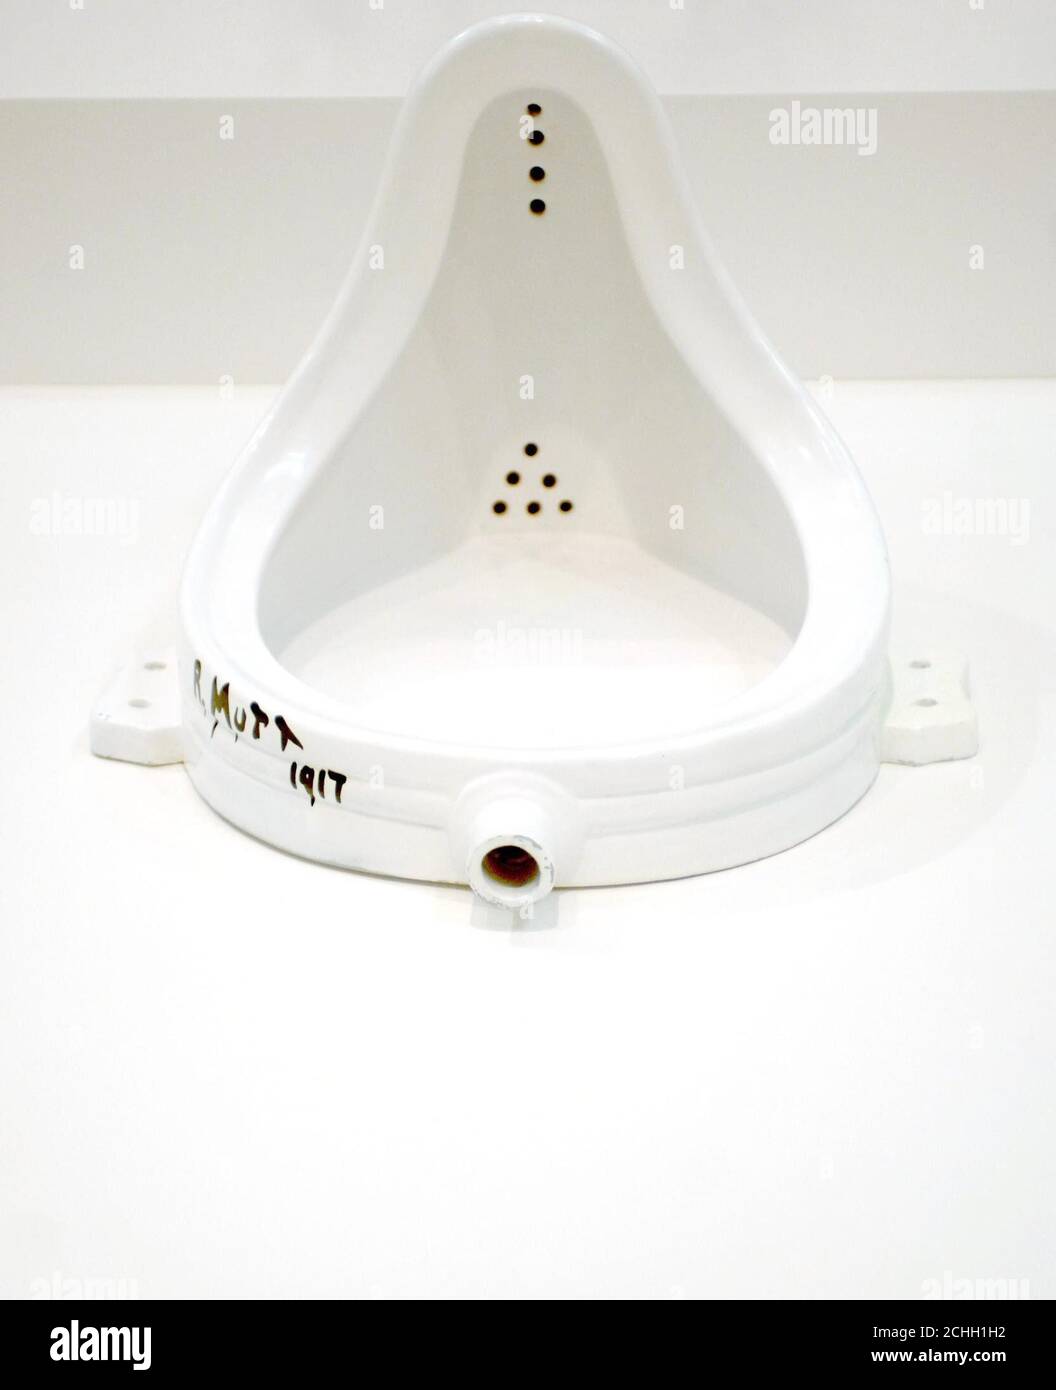 Duchamp's Fountain, in the Tate Modern, London, which is part of the gallery's Duchamp, Man Ray and Picaba exhibition which runs from February 21 to May 26, 2008. Stock Photo